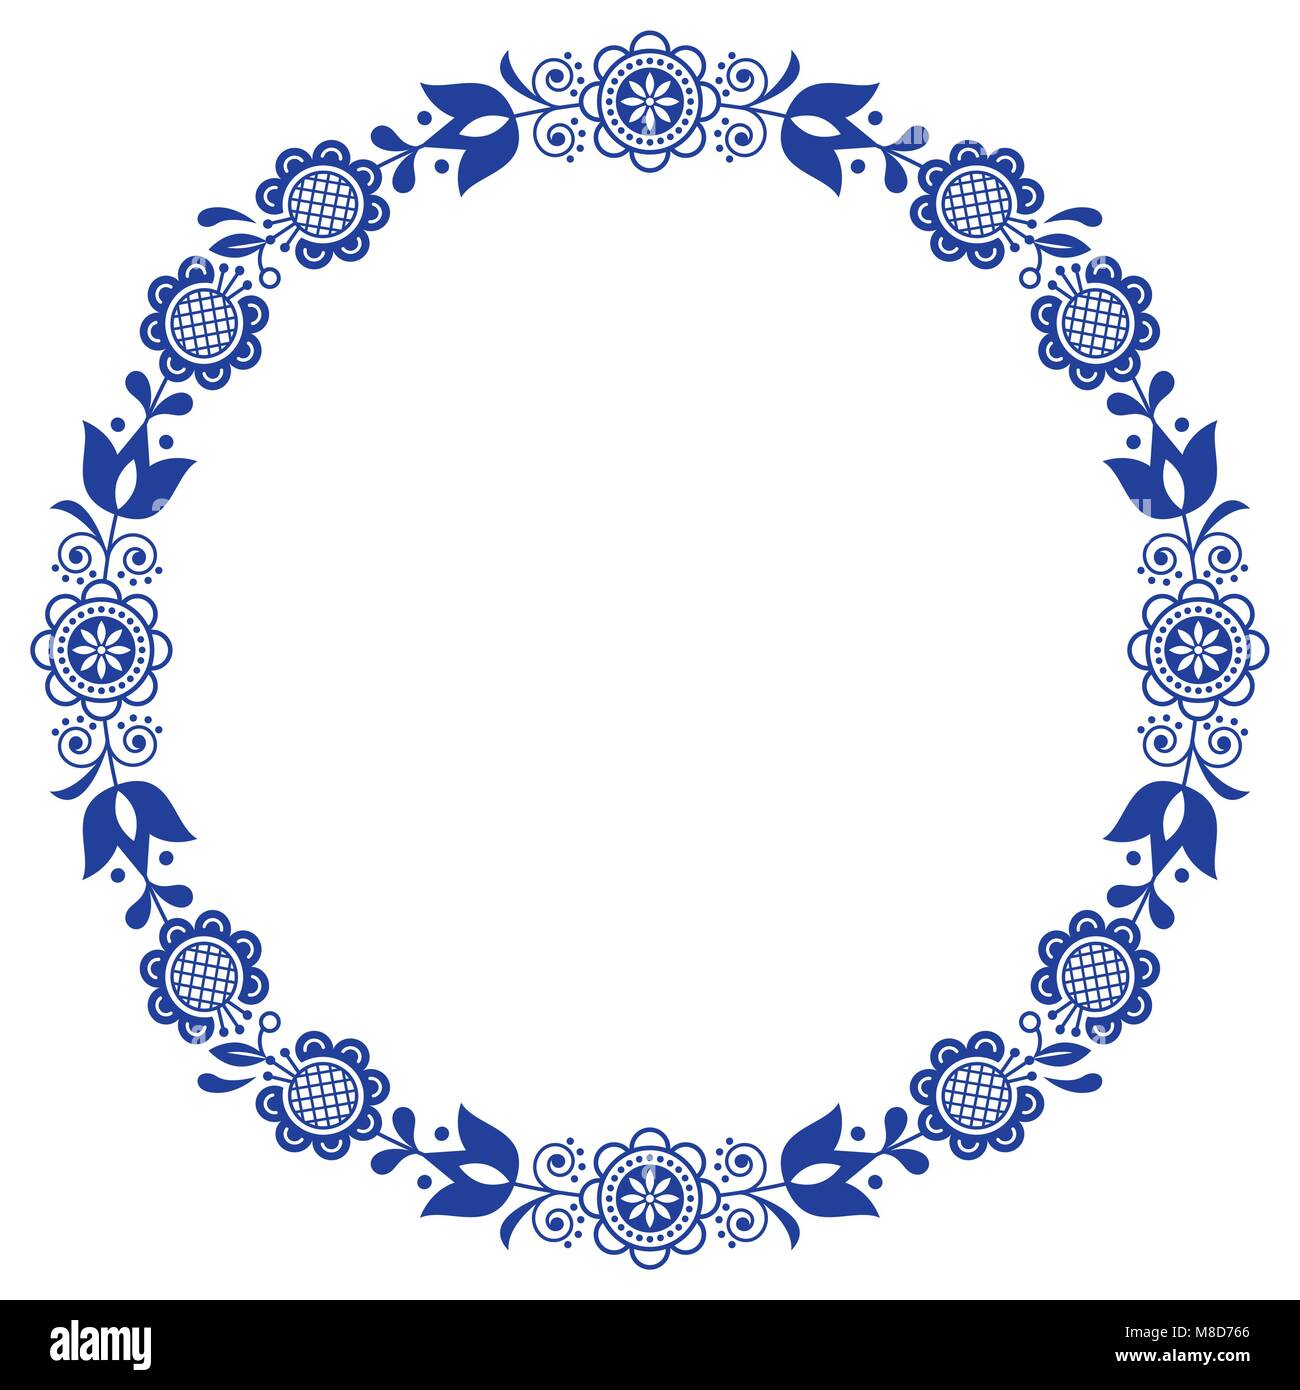 Scandinavian folk art floral werteth, vector ornamental round frame, design with flowers in circle, ethnic composition Stock Vector